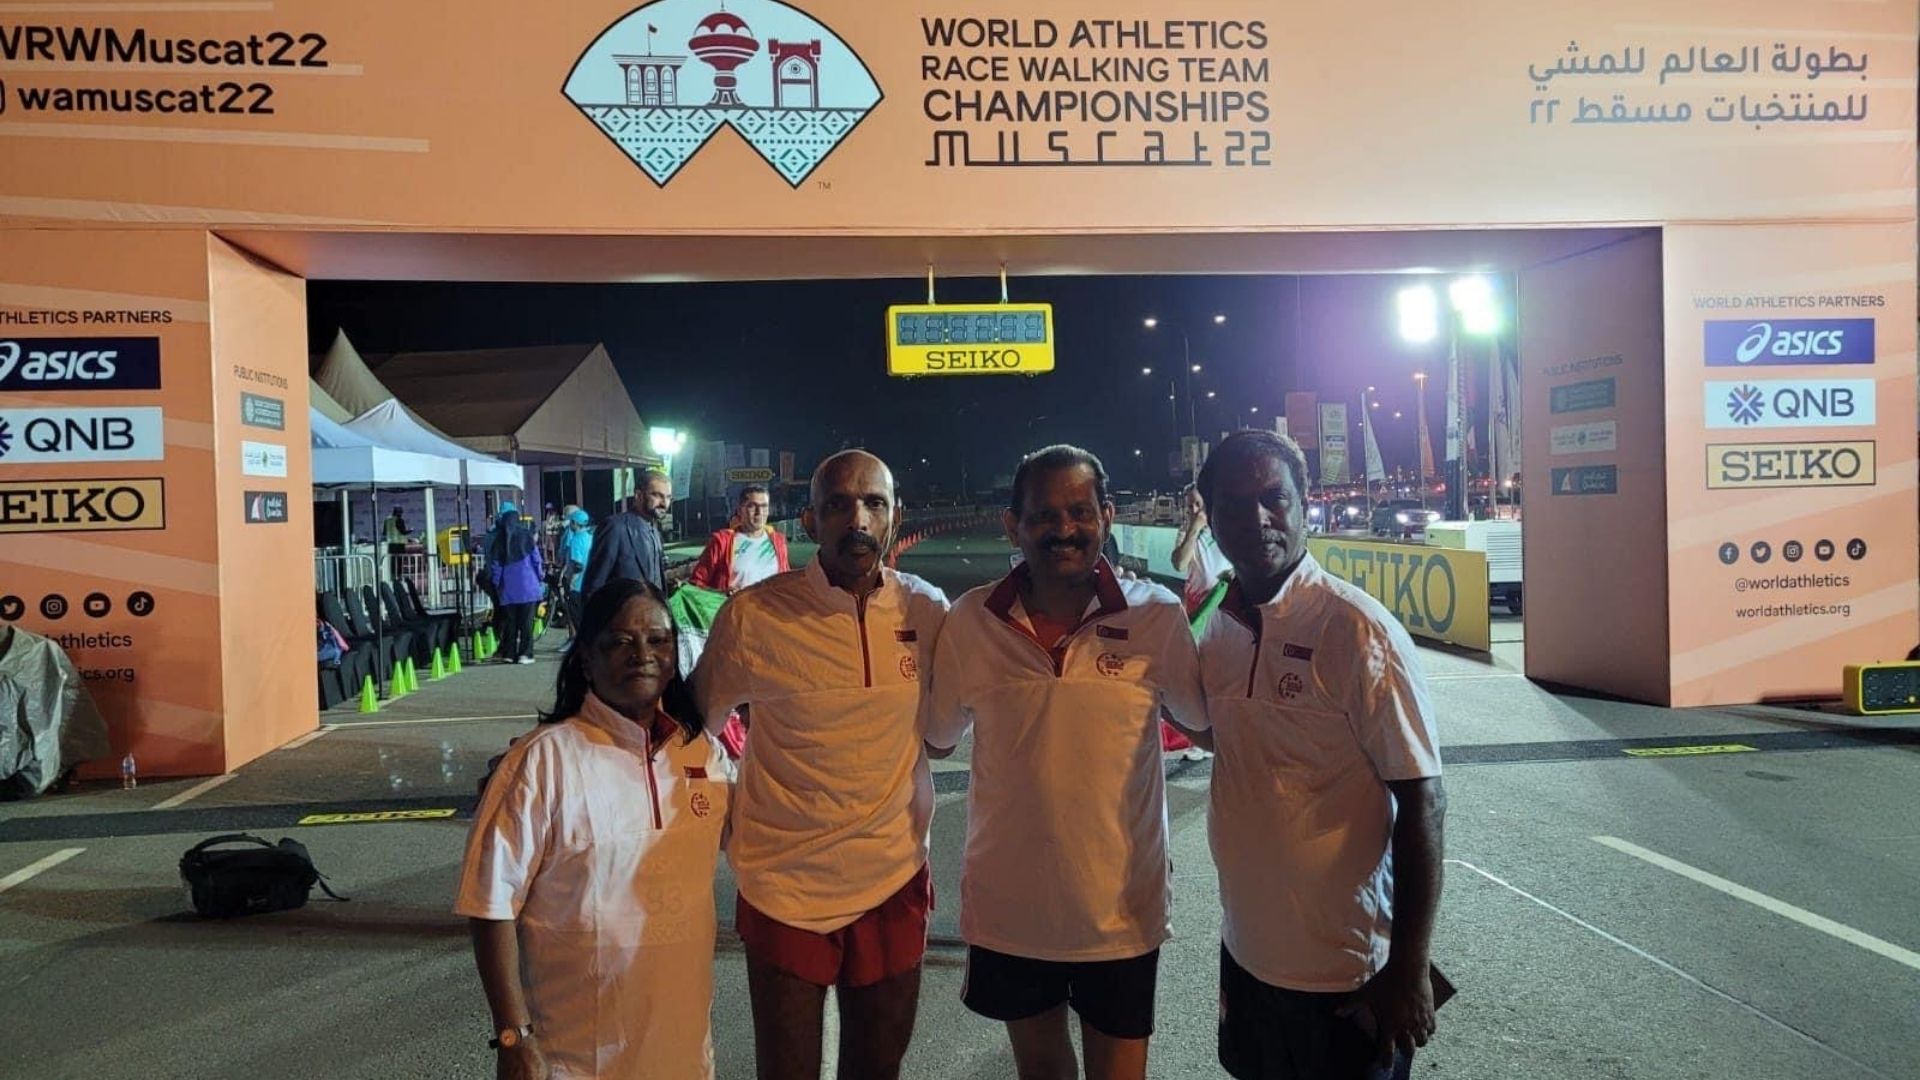 Defying age barriers at world track and field championship